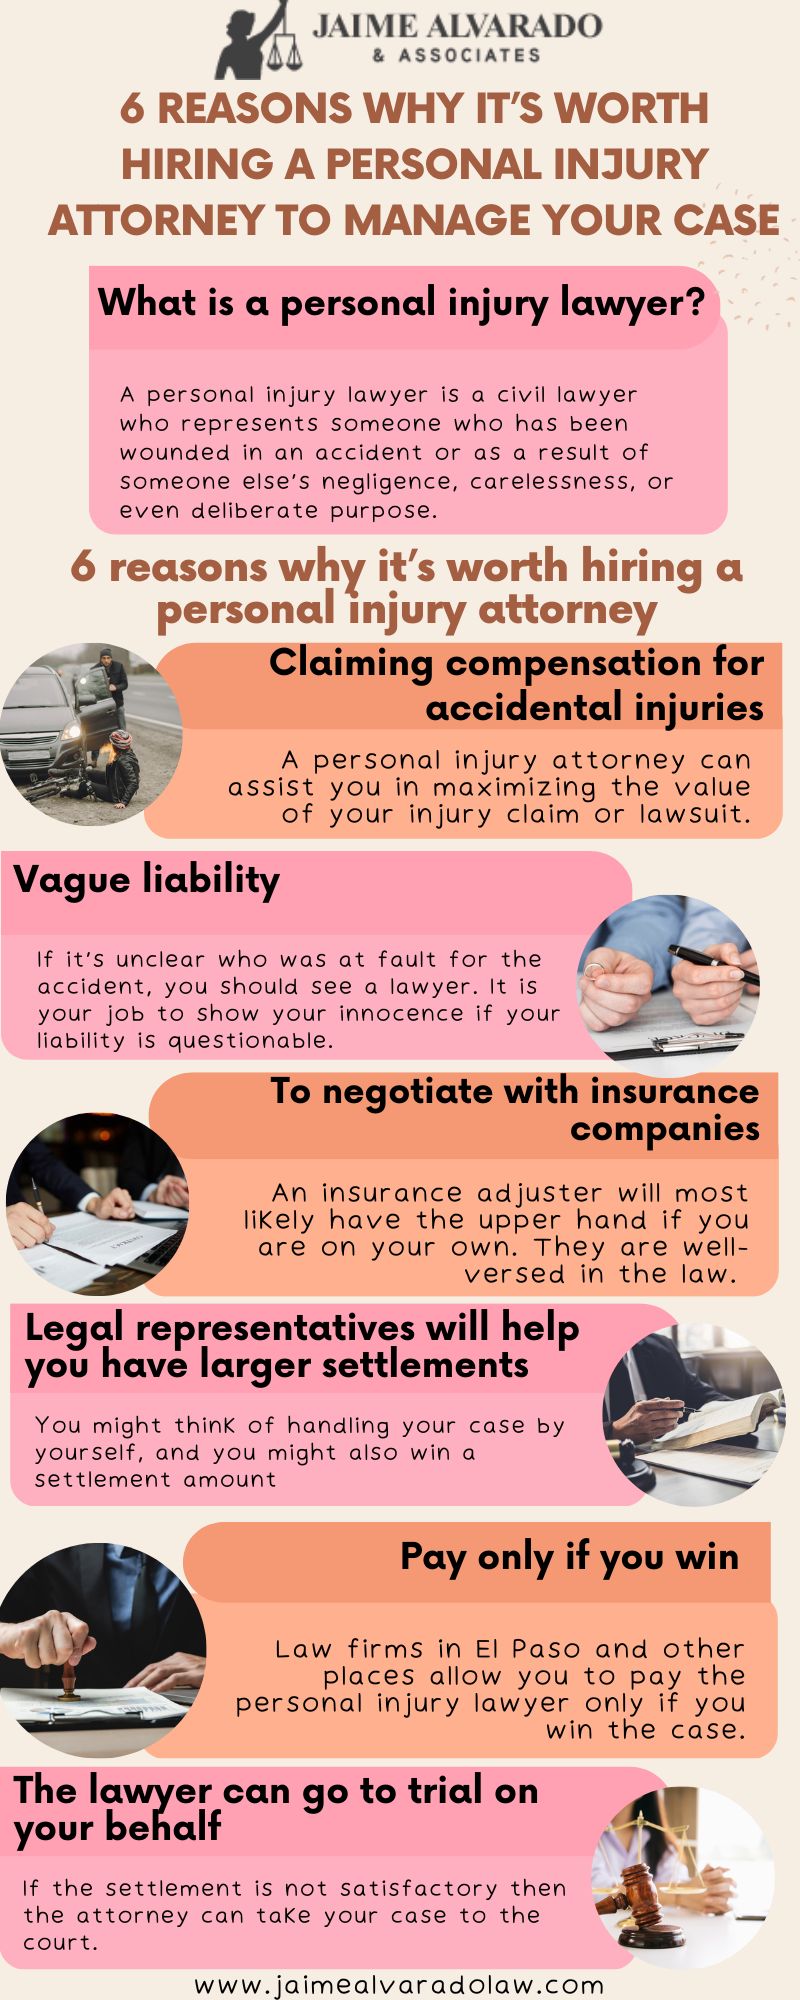 6 Reasons why it’s Worth Hiring a Personal Injury Attorney To Manage Your Case